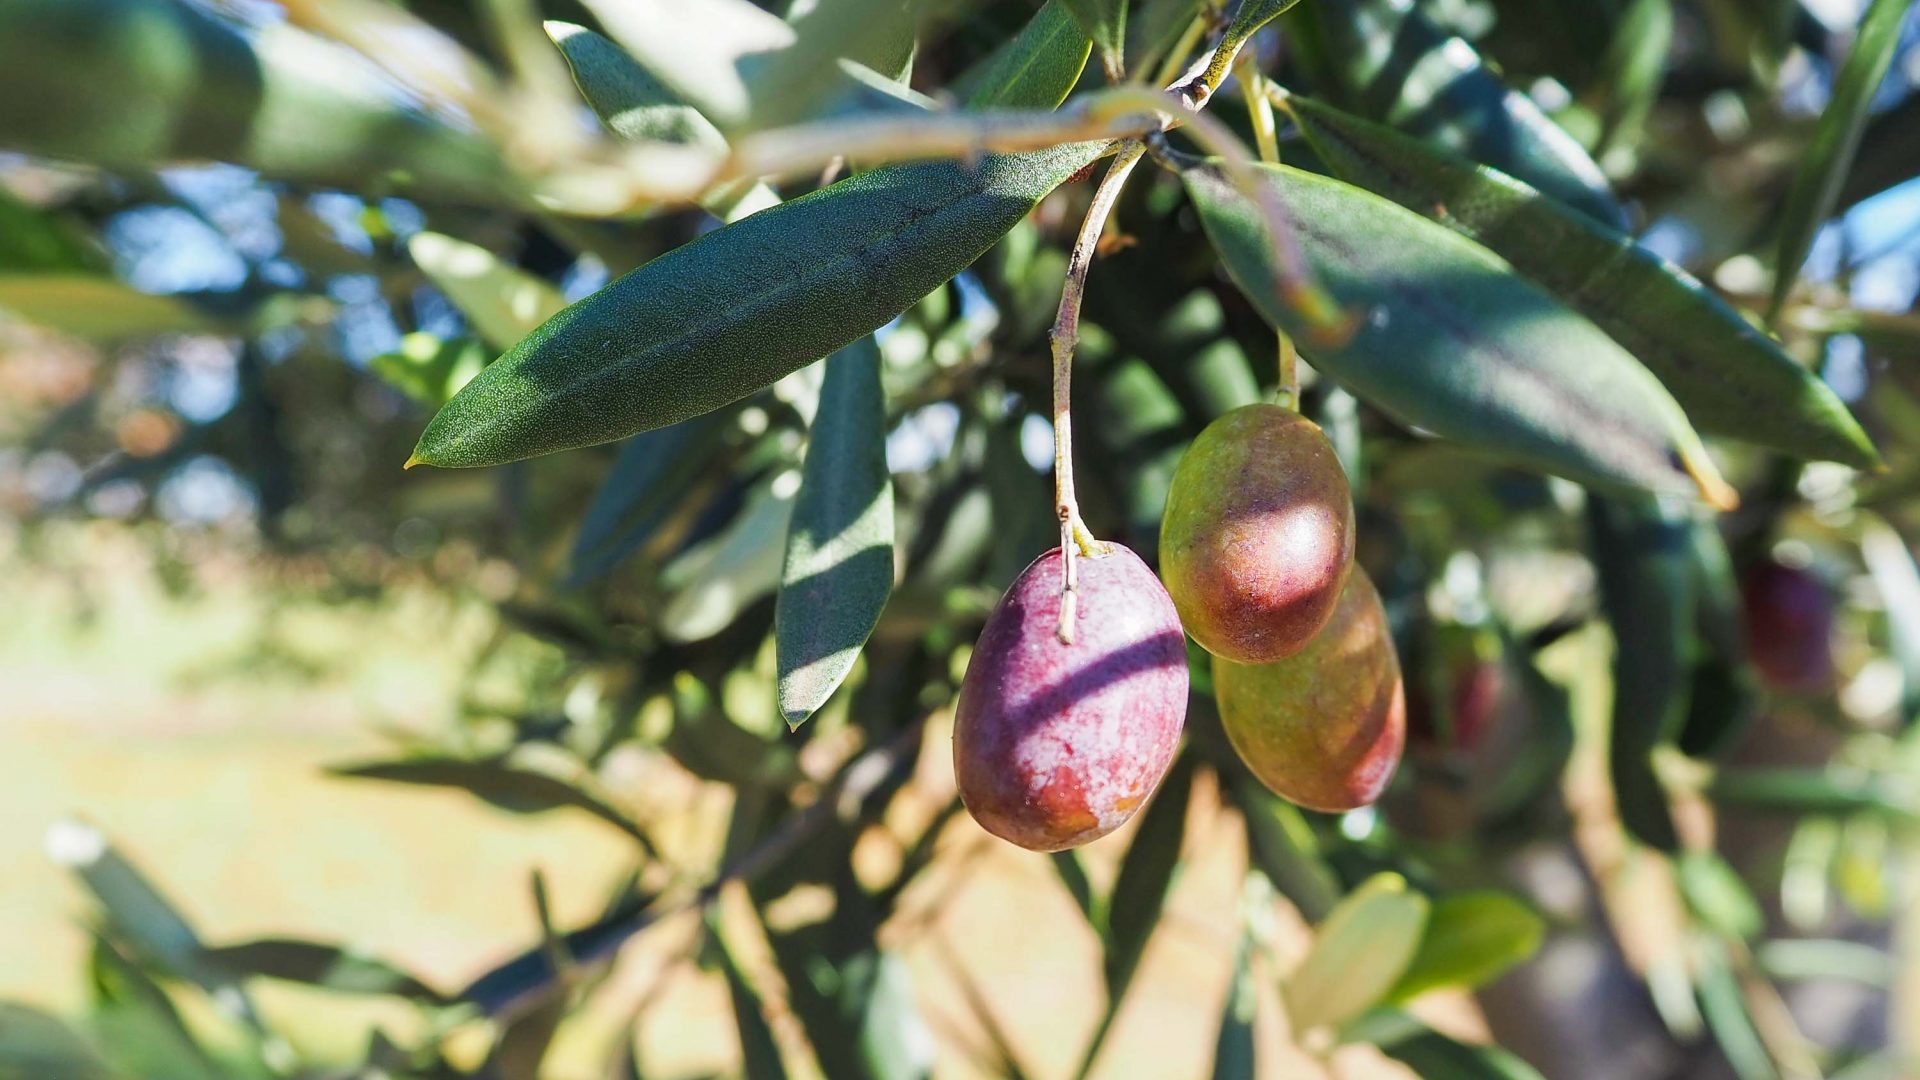 Olives growing at Karrabool Olives which makes extra-virgin olive oil.